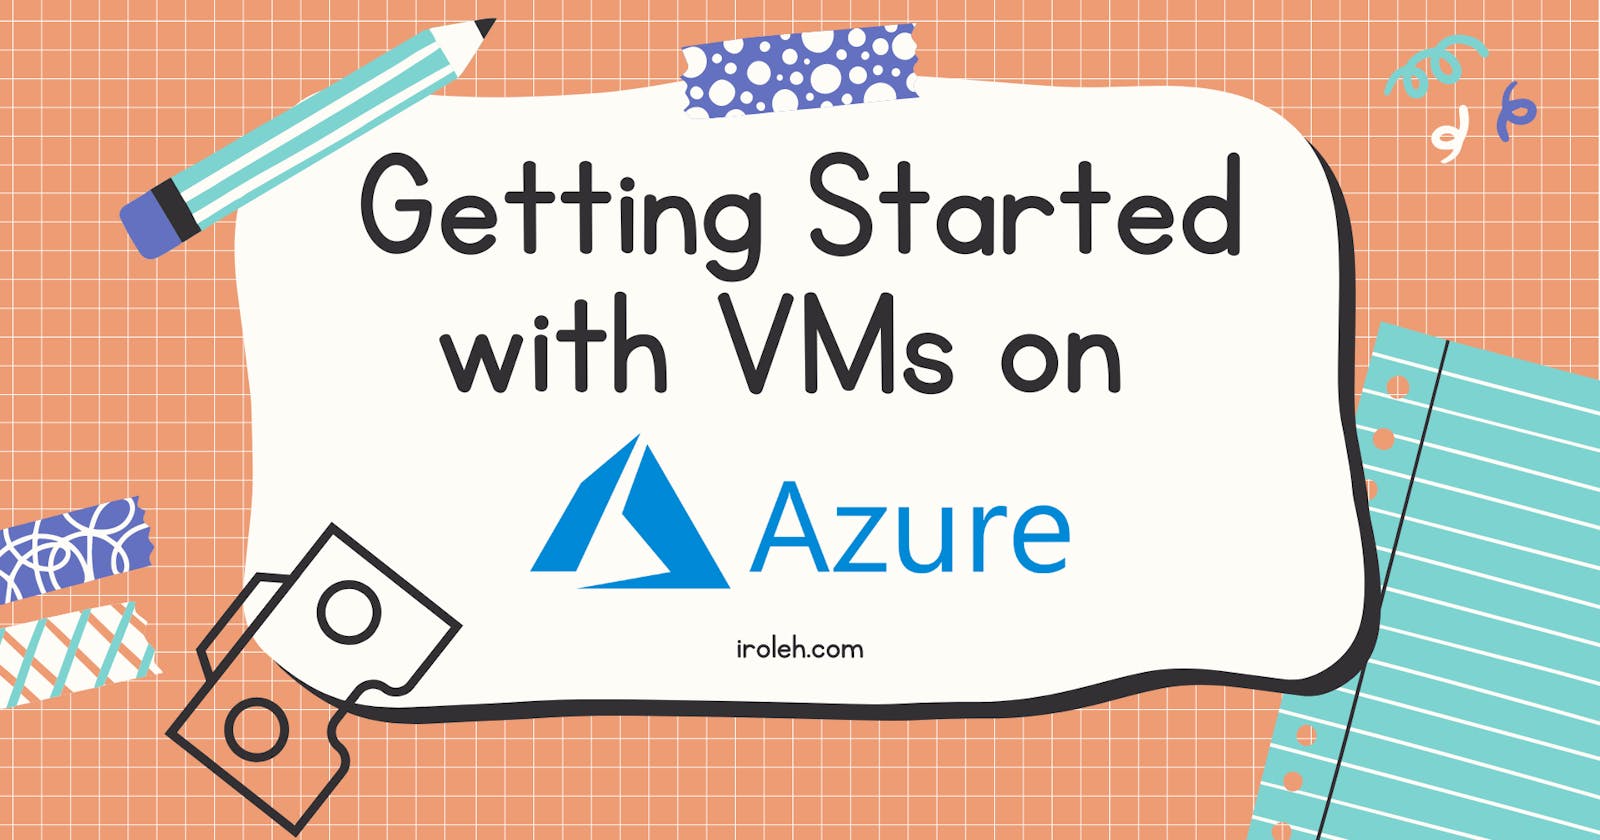 Getting Started with VMs on Azure